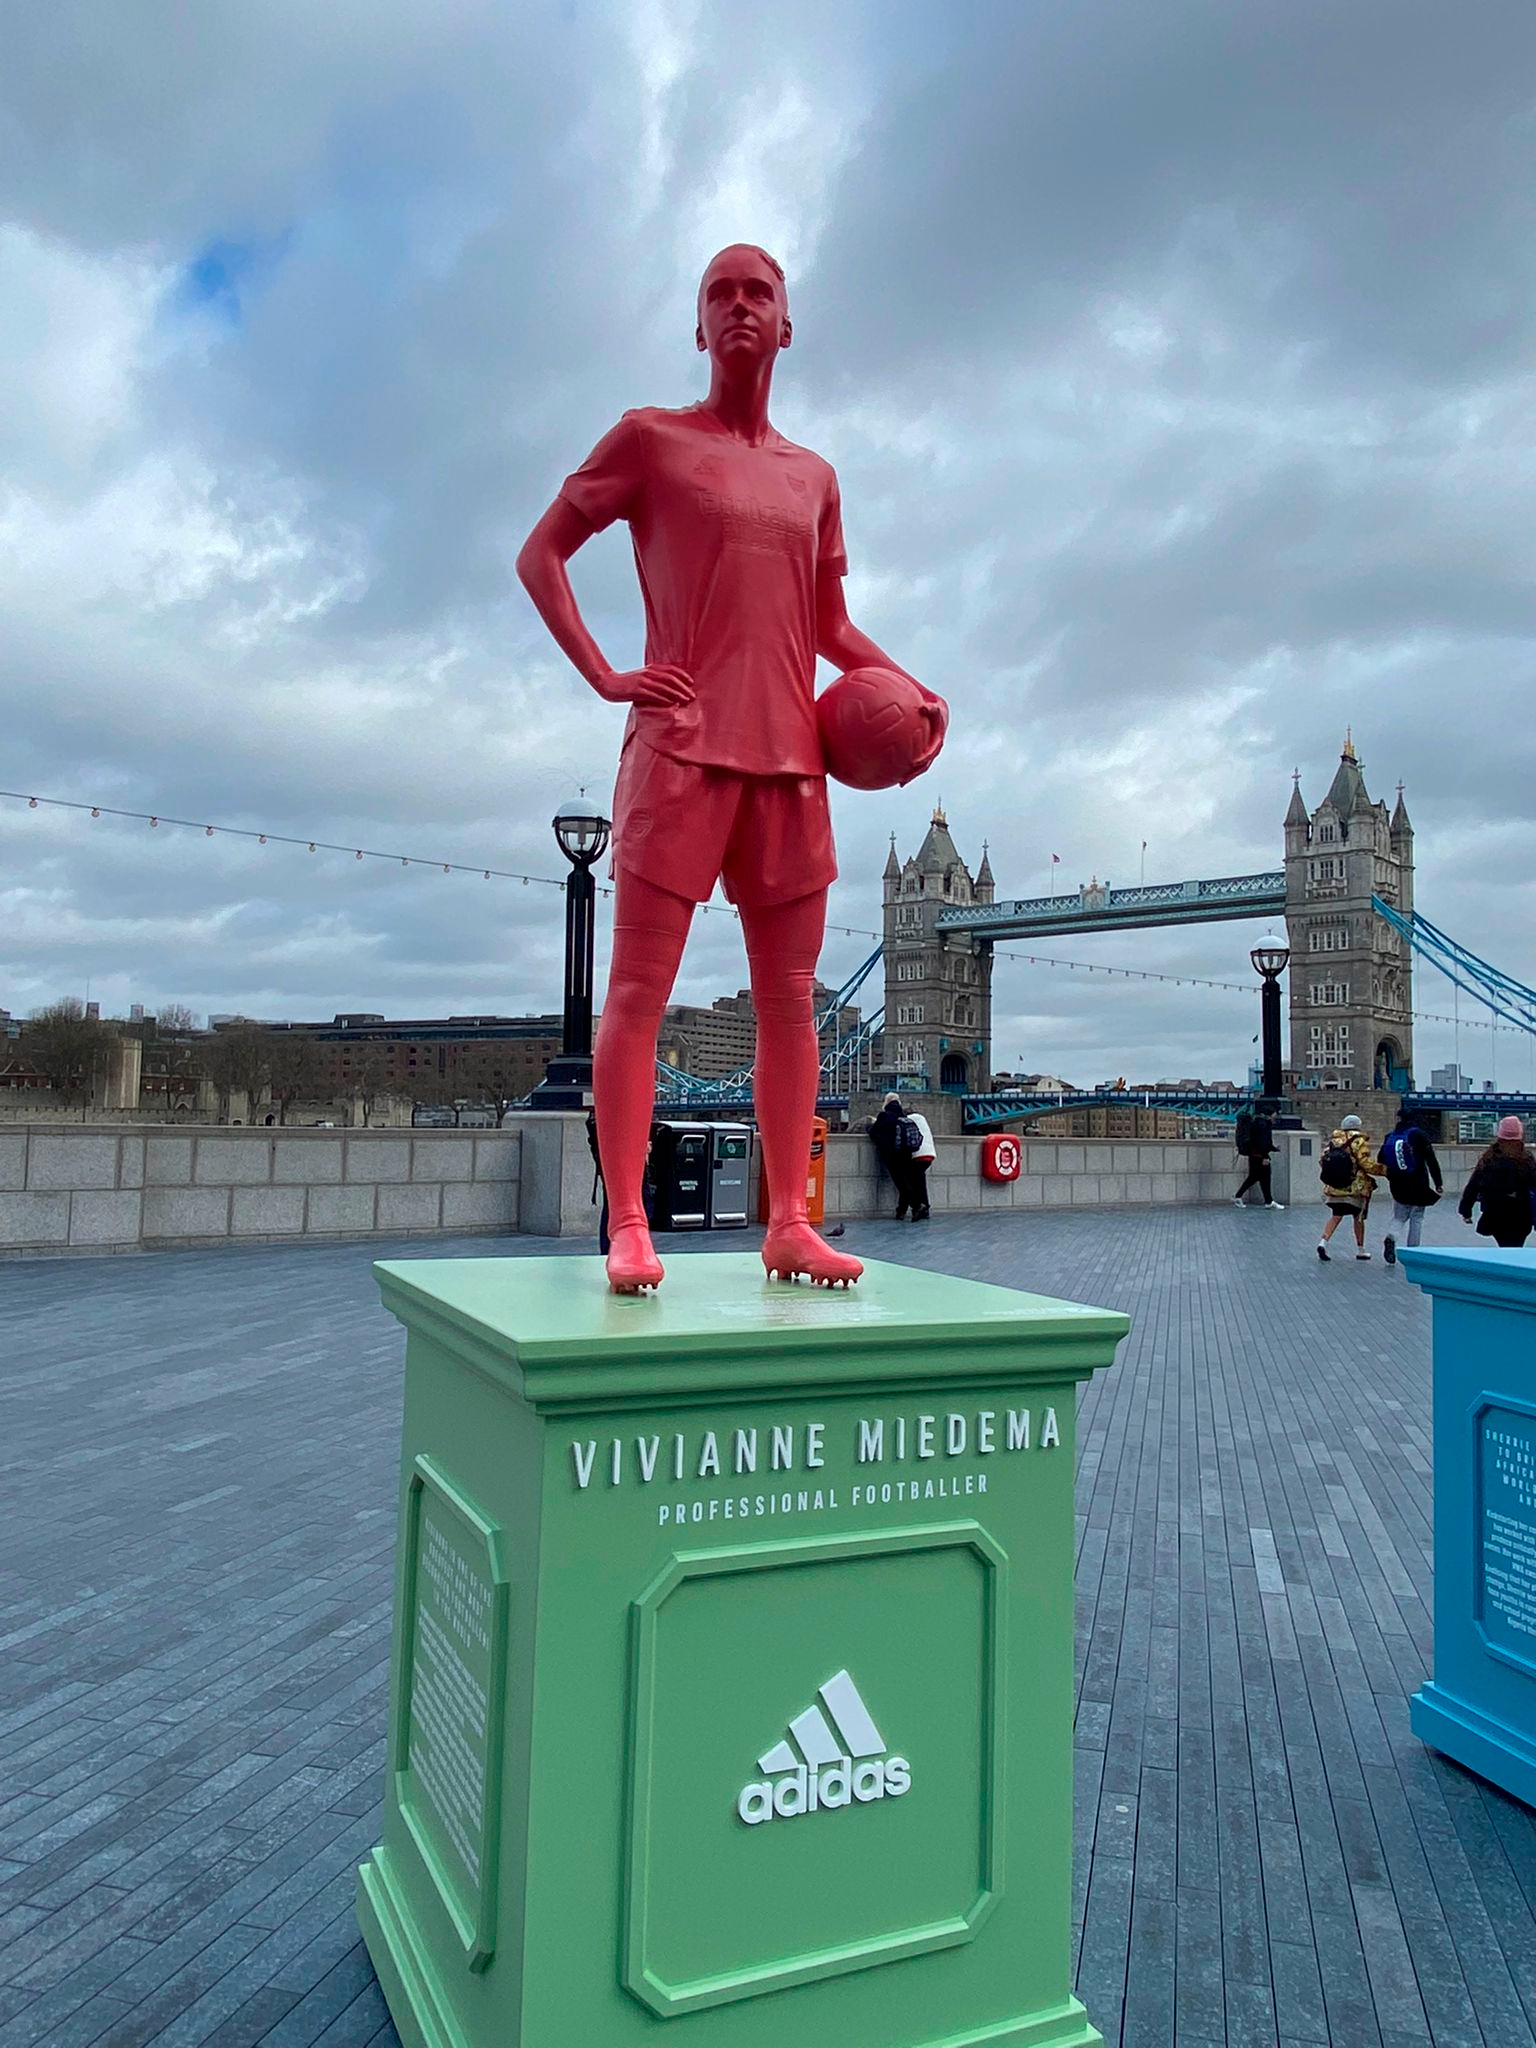 In defense of women's sport, adidas installs statues of athletes in